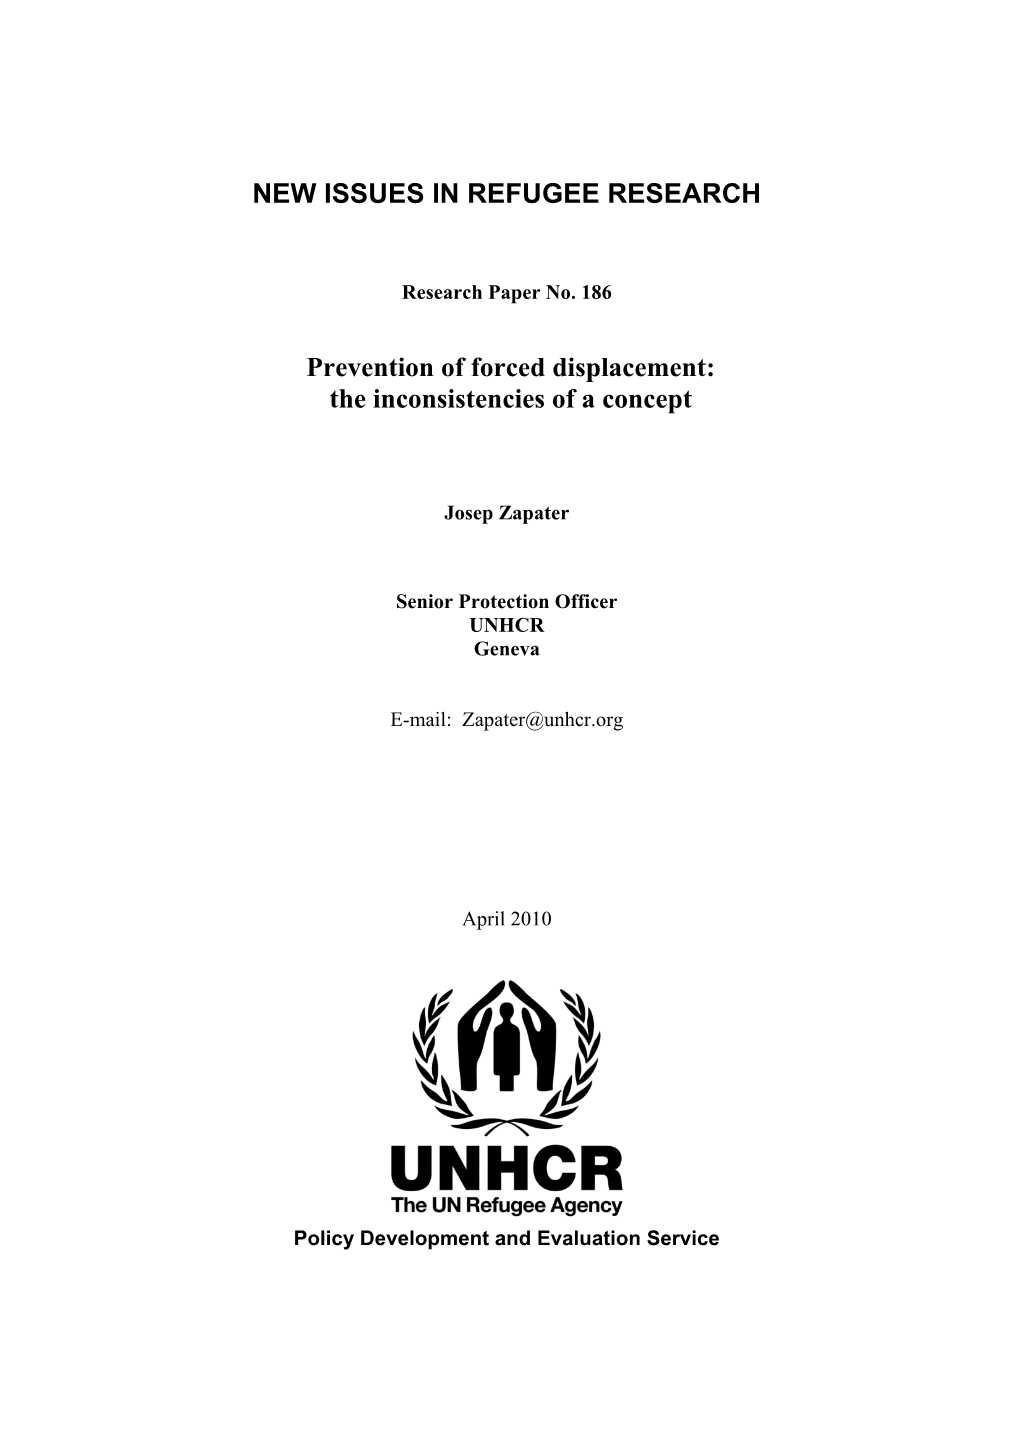 Prevention of Forced Displacement: the Inconsistencies of a Concept